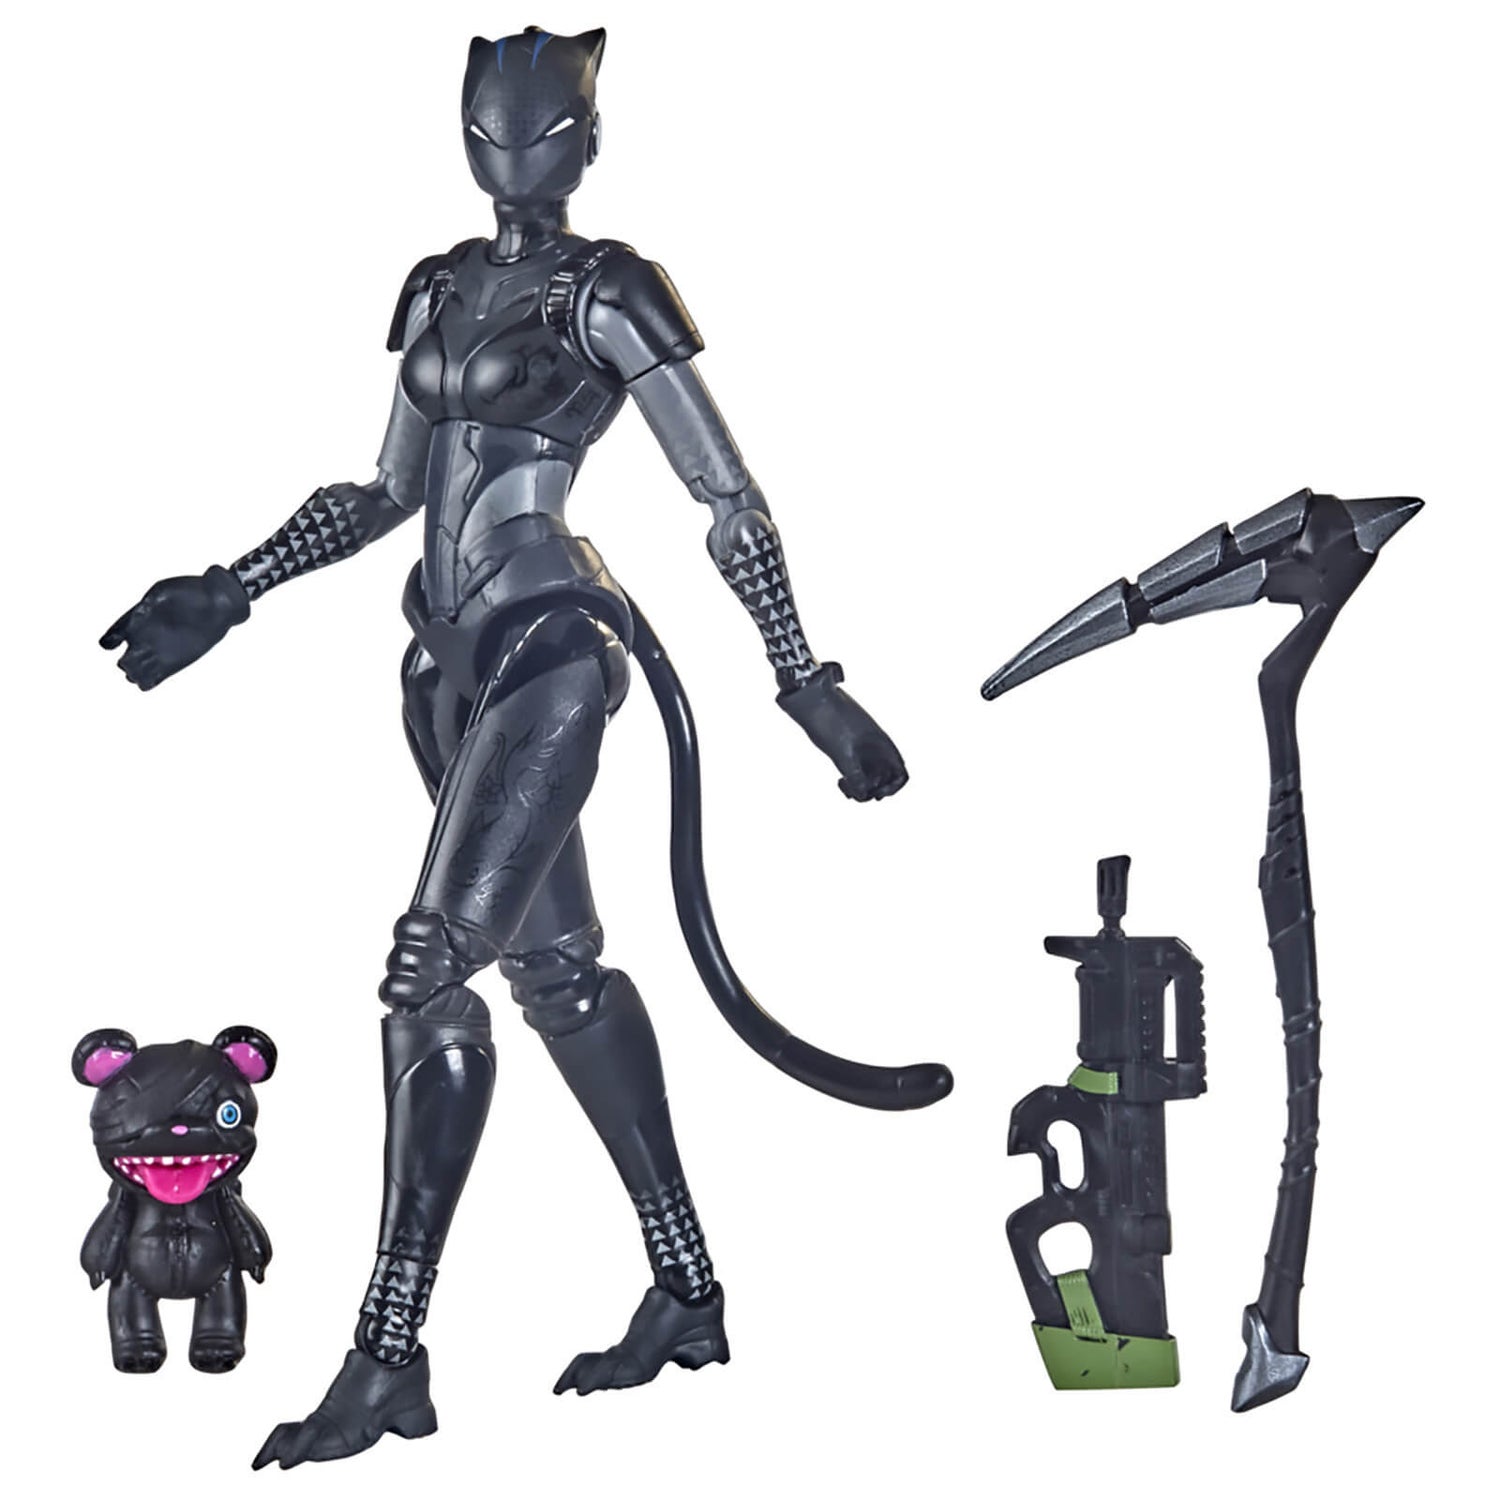 Hasbro Fortnite Victory Royale Series Lynx 6 Inch Action Figure